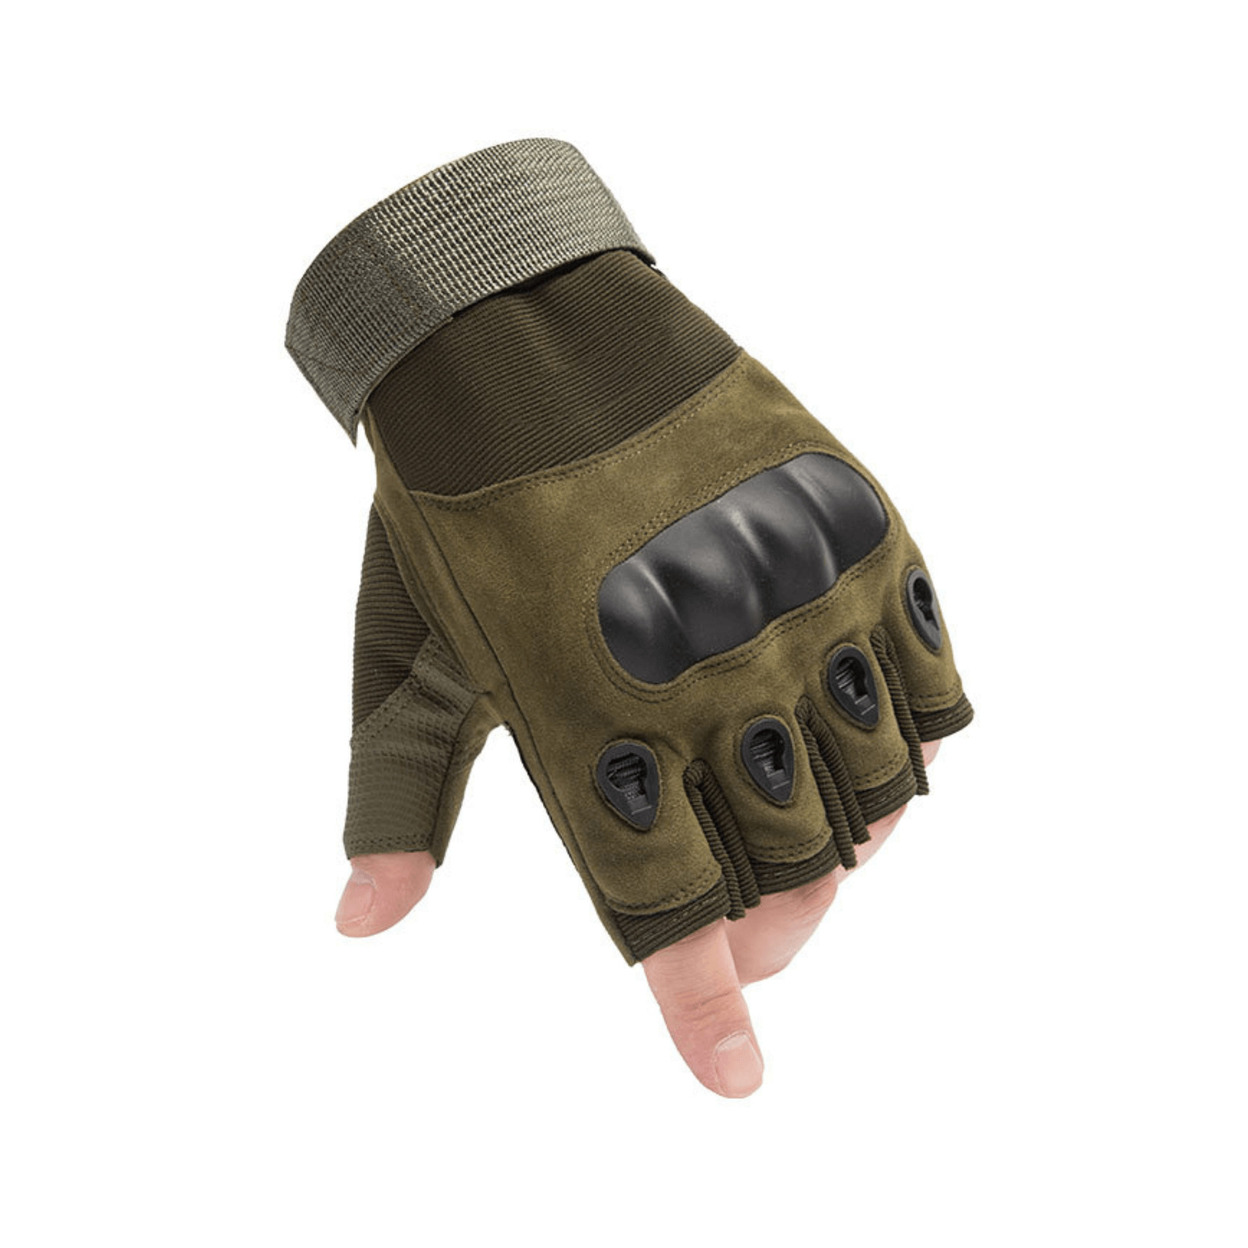 Tactical Fingerless Airsoft Gloves For Outdoor Sports, Paintball, And Motorcycling - Green, Large